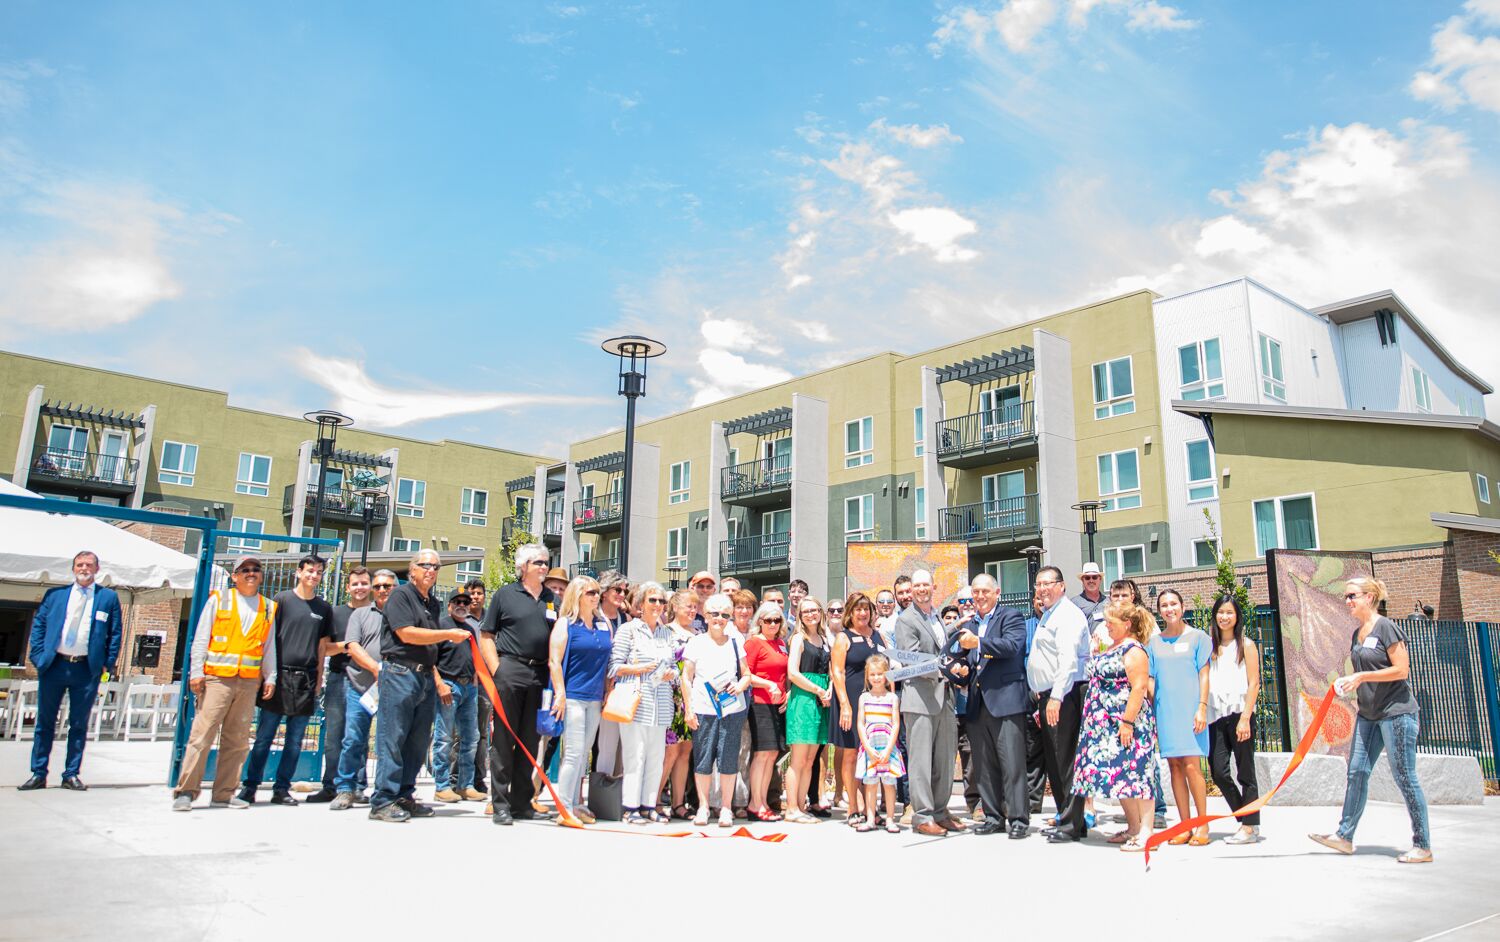 The Cannery at Lewis Street, a 104-Unit Affordable Housing Community in Northern California has Opened